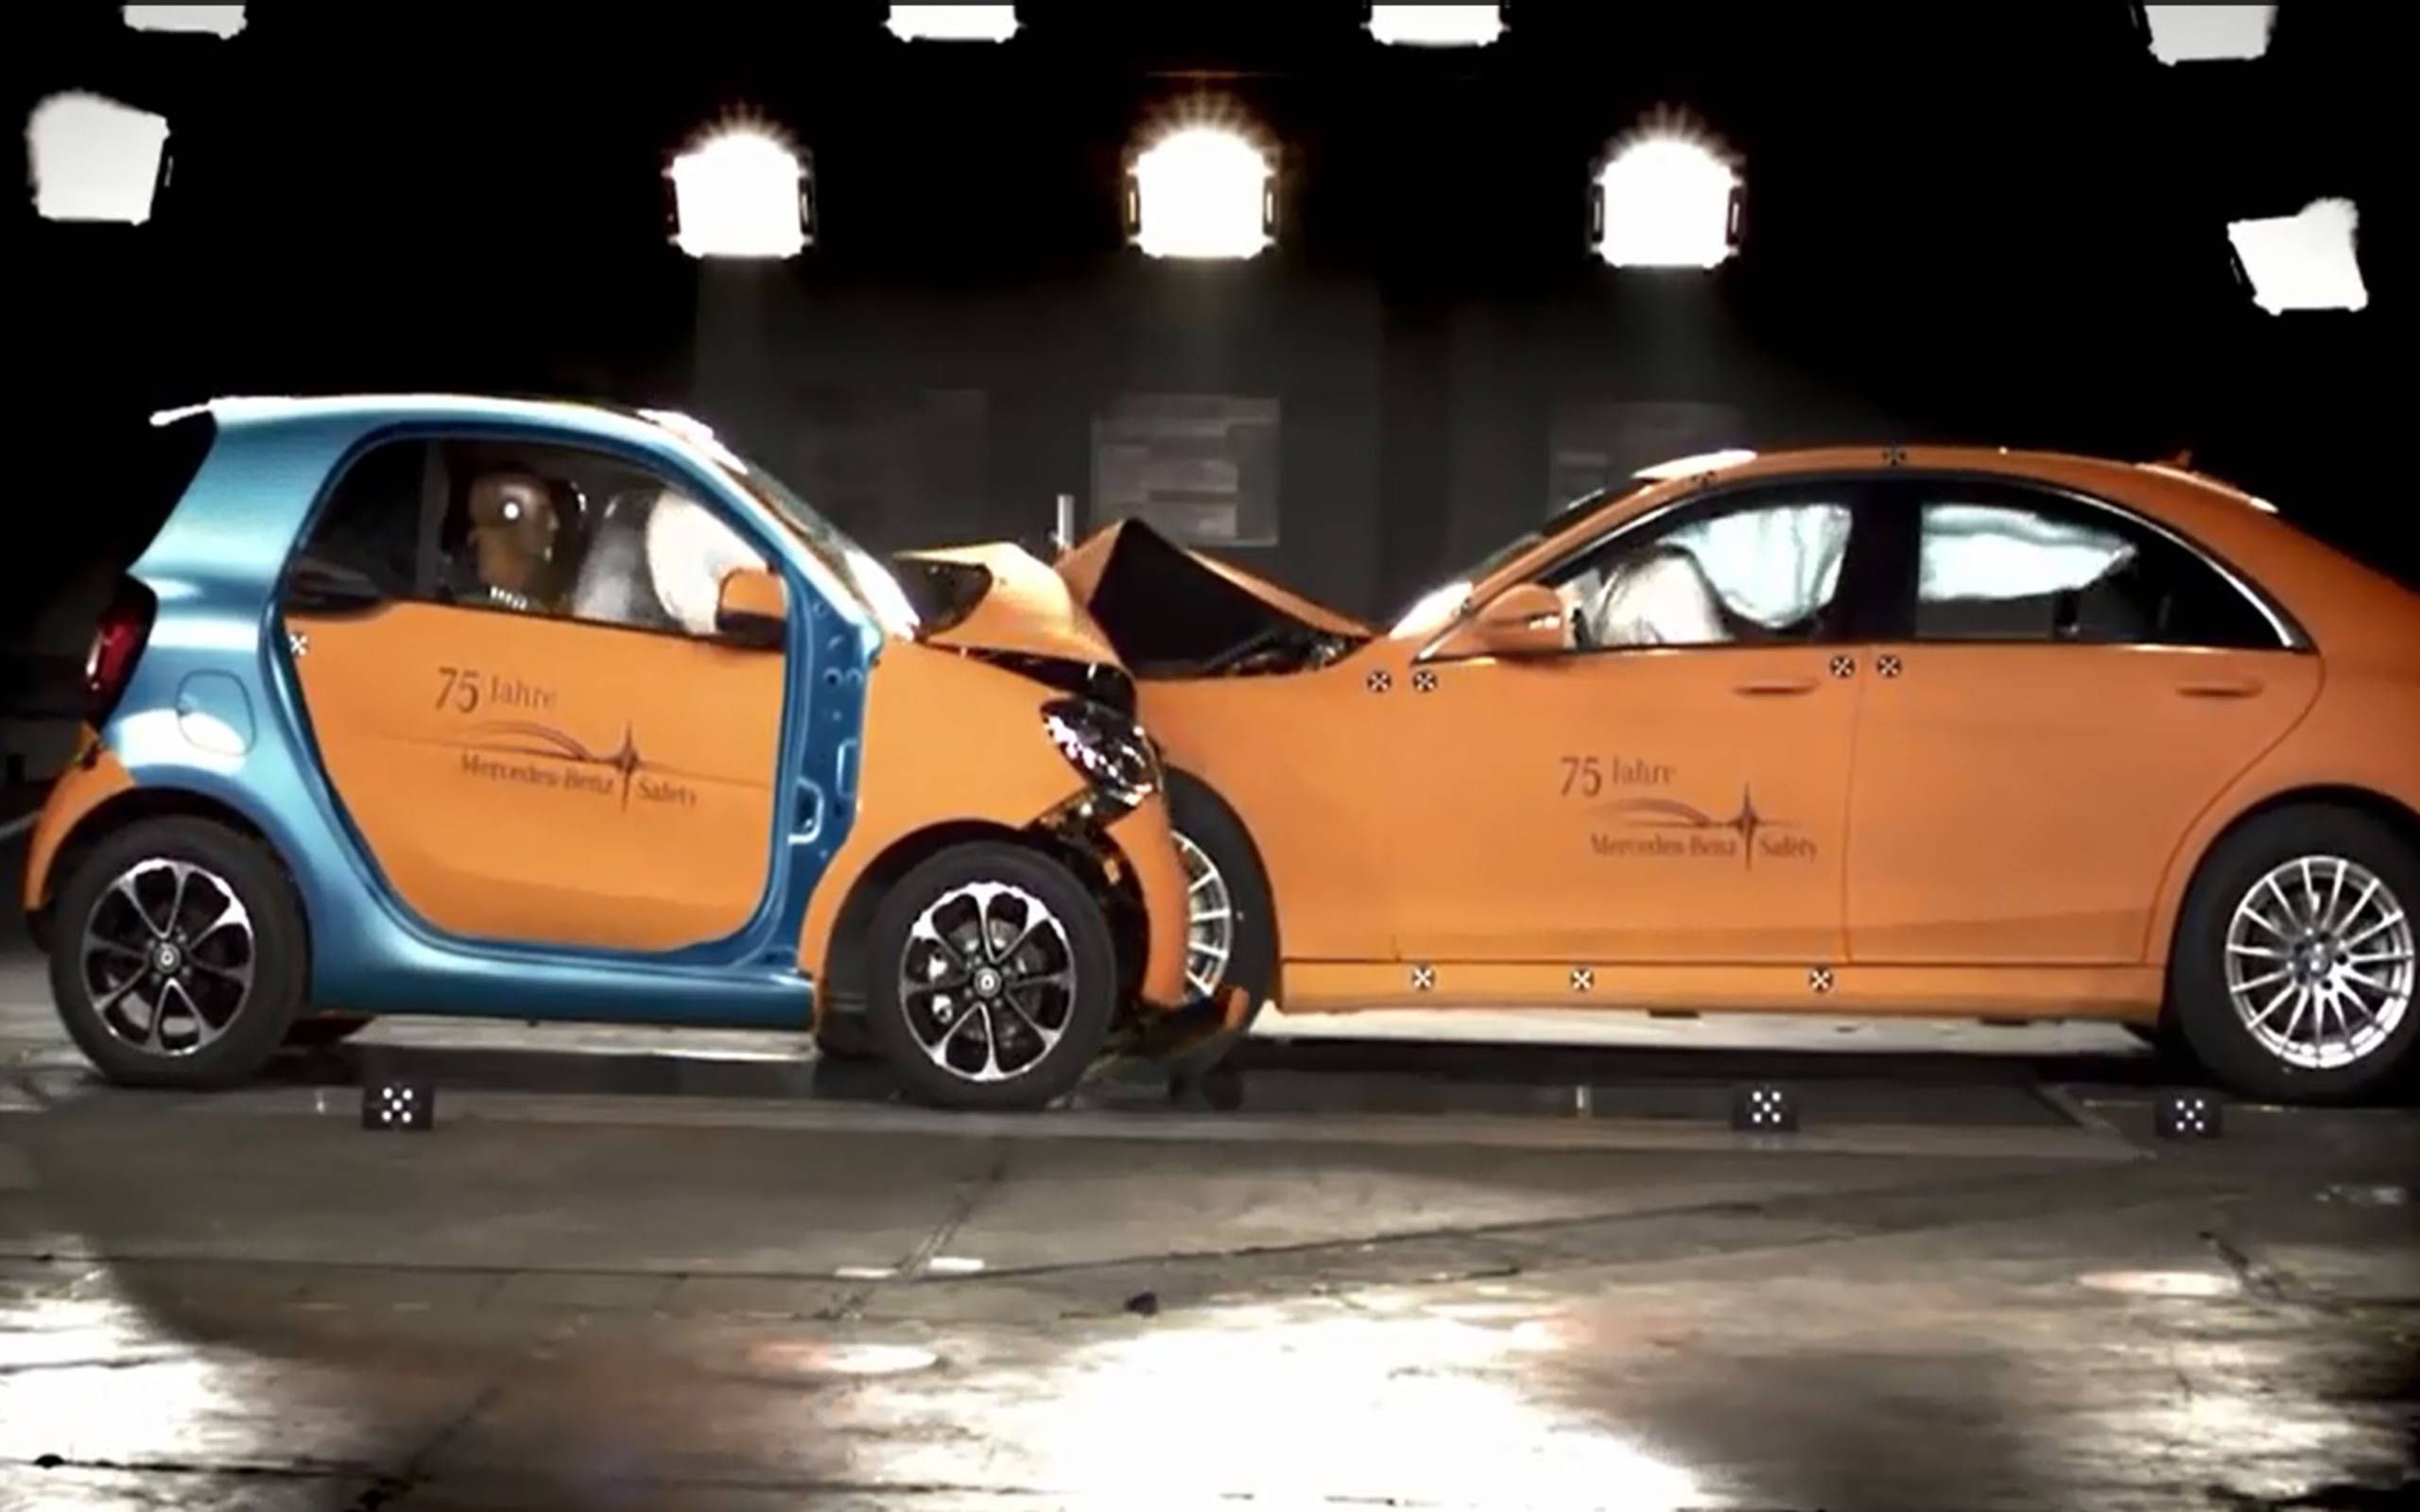 Smart fortwo goes up against the S-class in a crash test